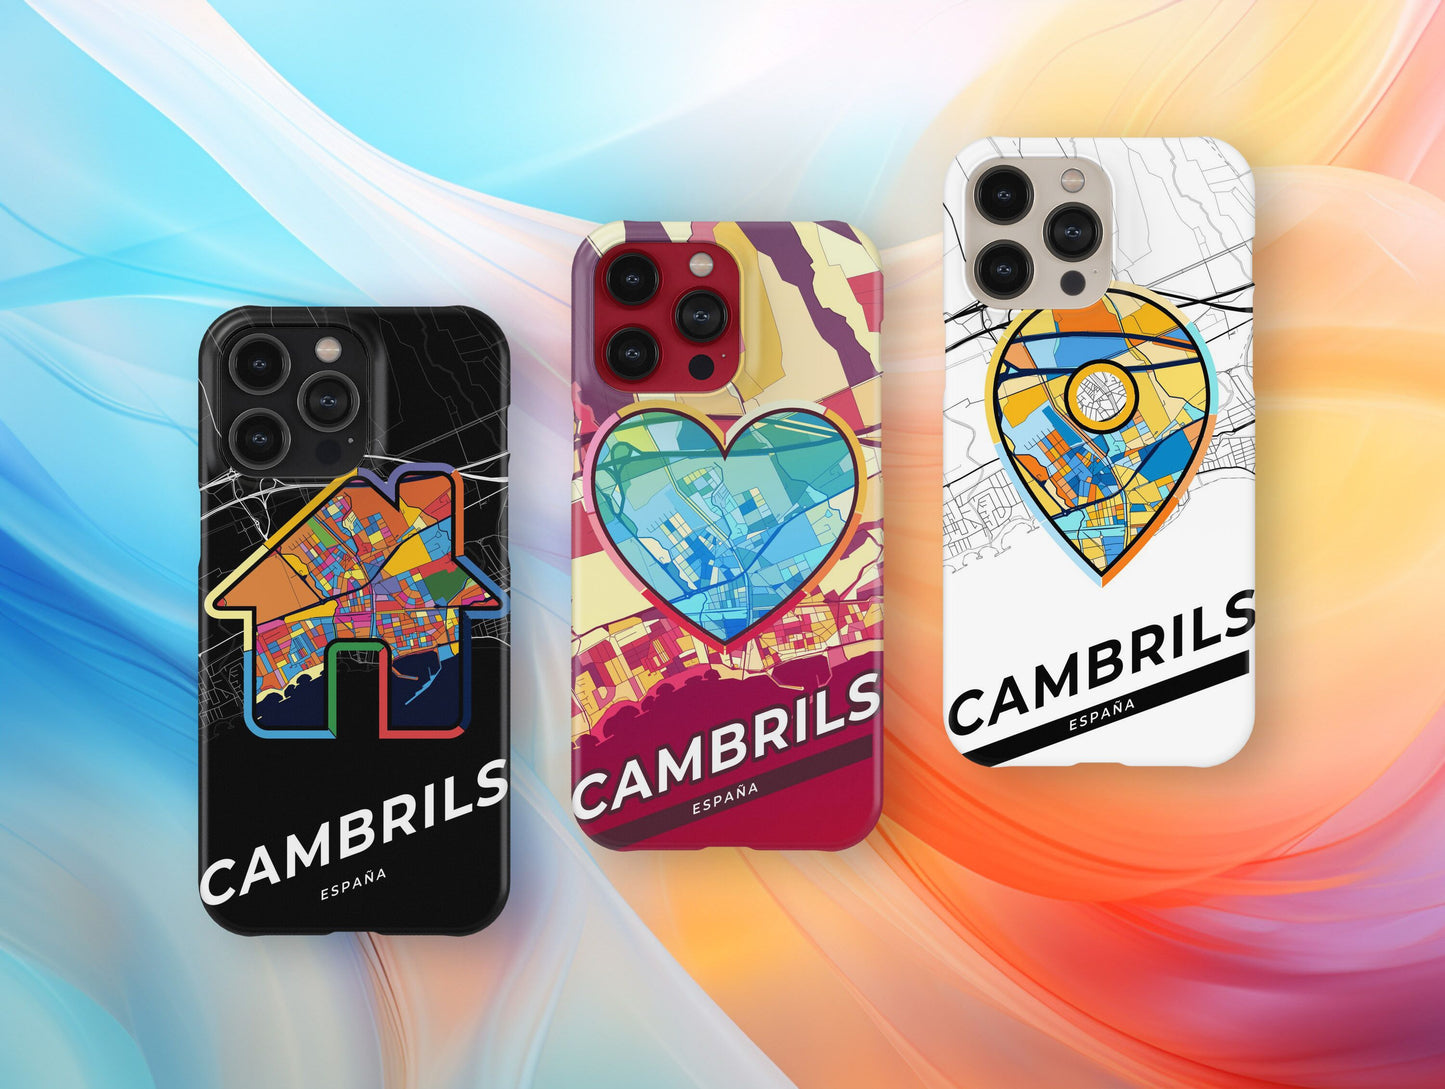 Cambrils Spain slim phone case with colorful icon. Birthday, wedding or housewarming gift. Couple match cases.